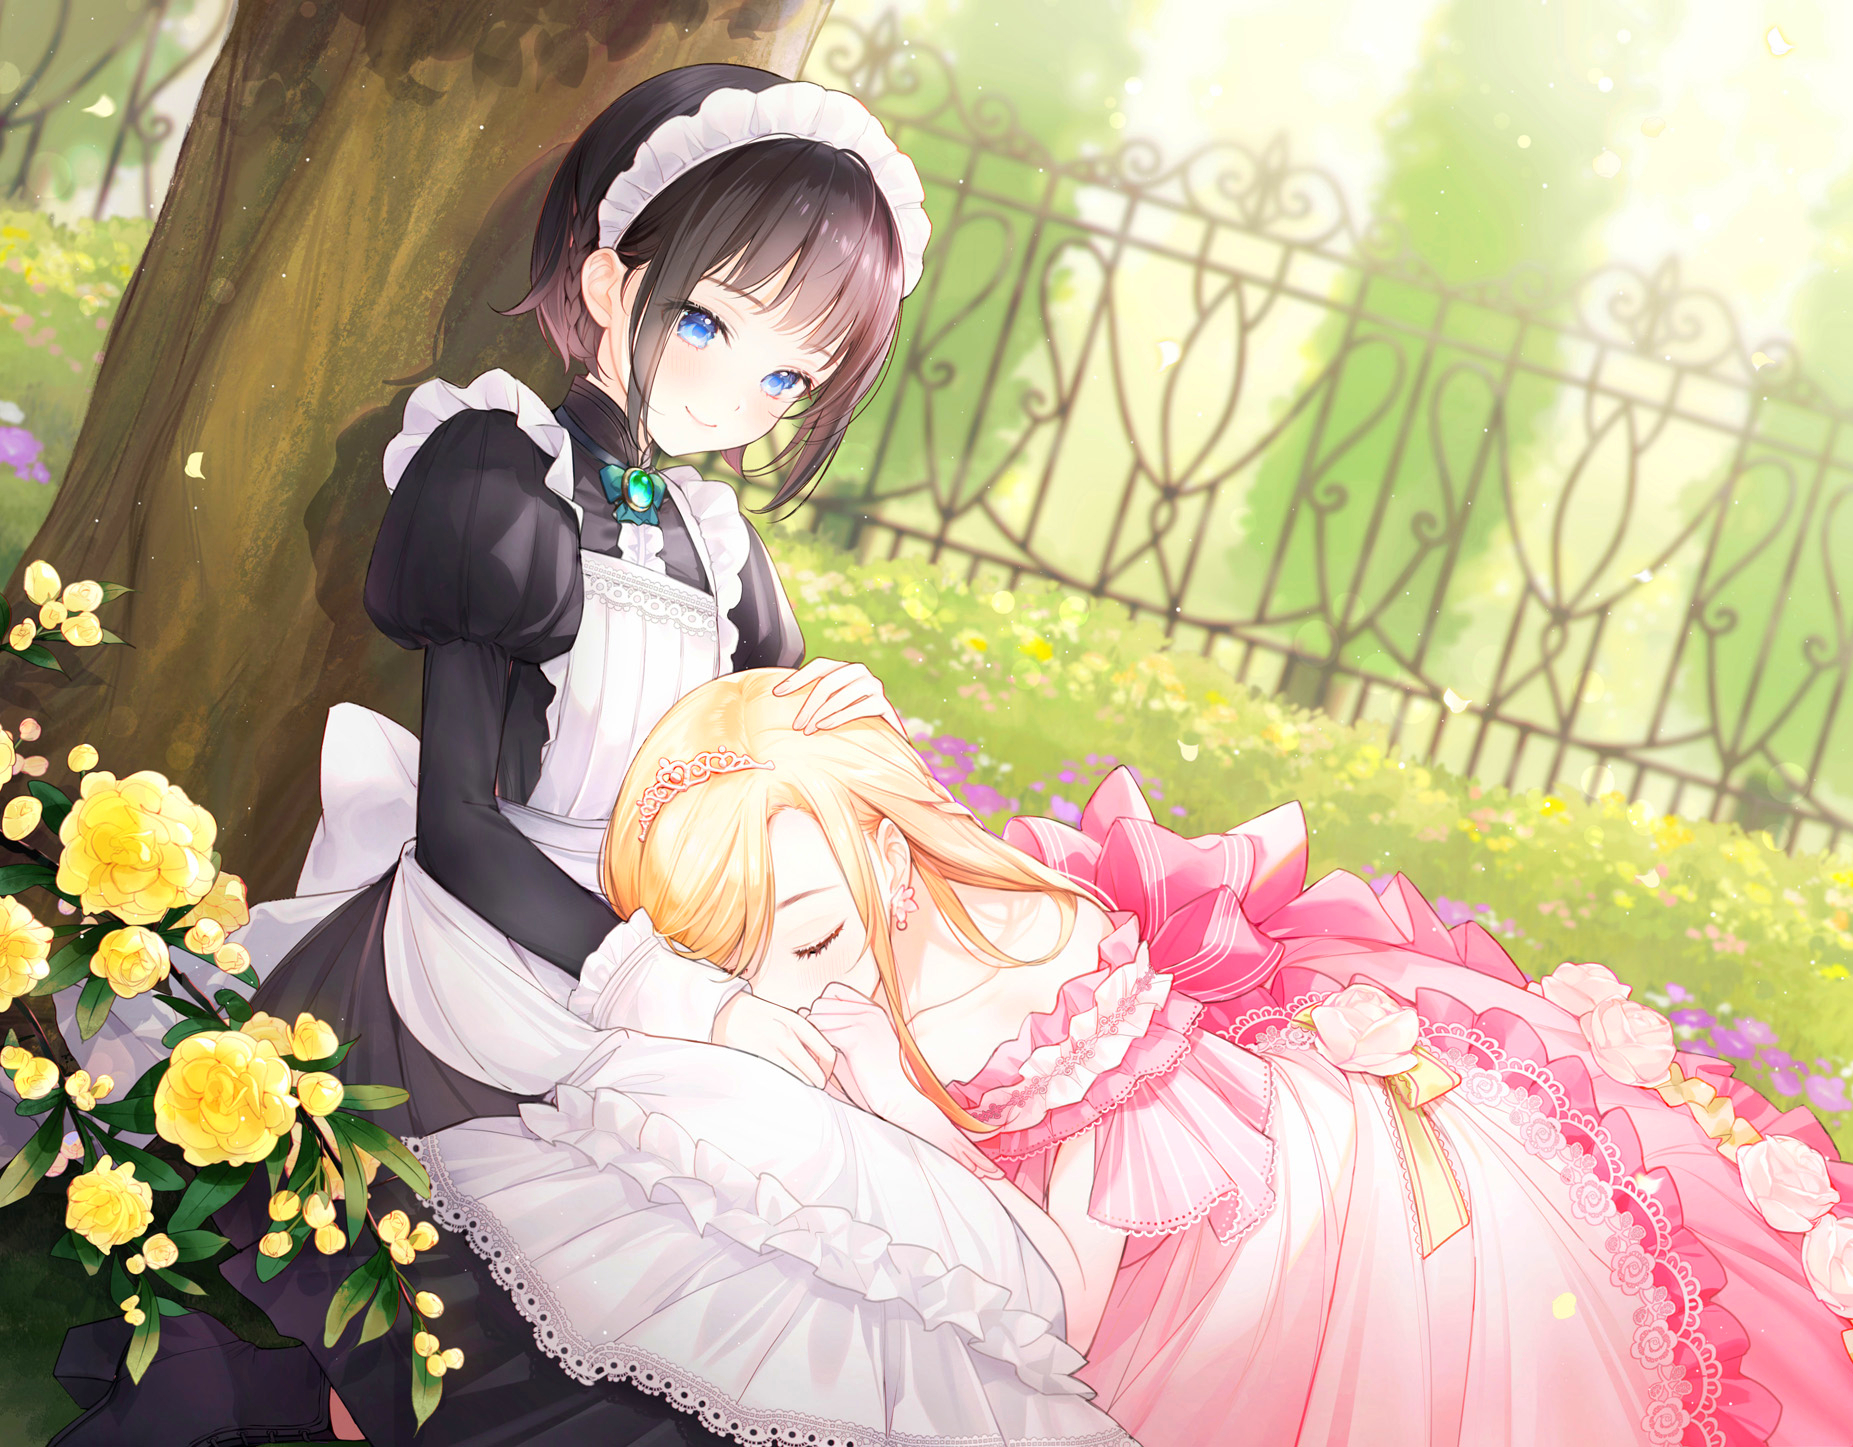 Gomzi Anime Anime Girls Original Characters Artwork Maid Outfit Dress 1853x1447